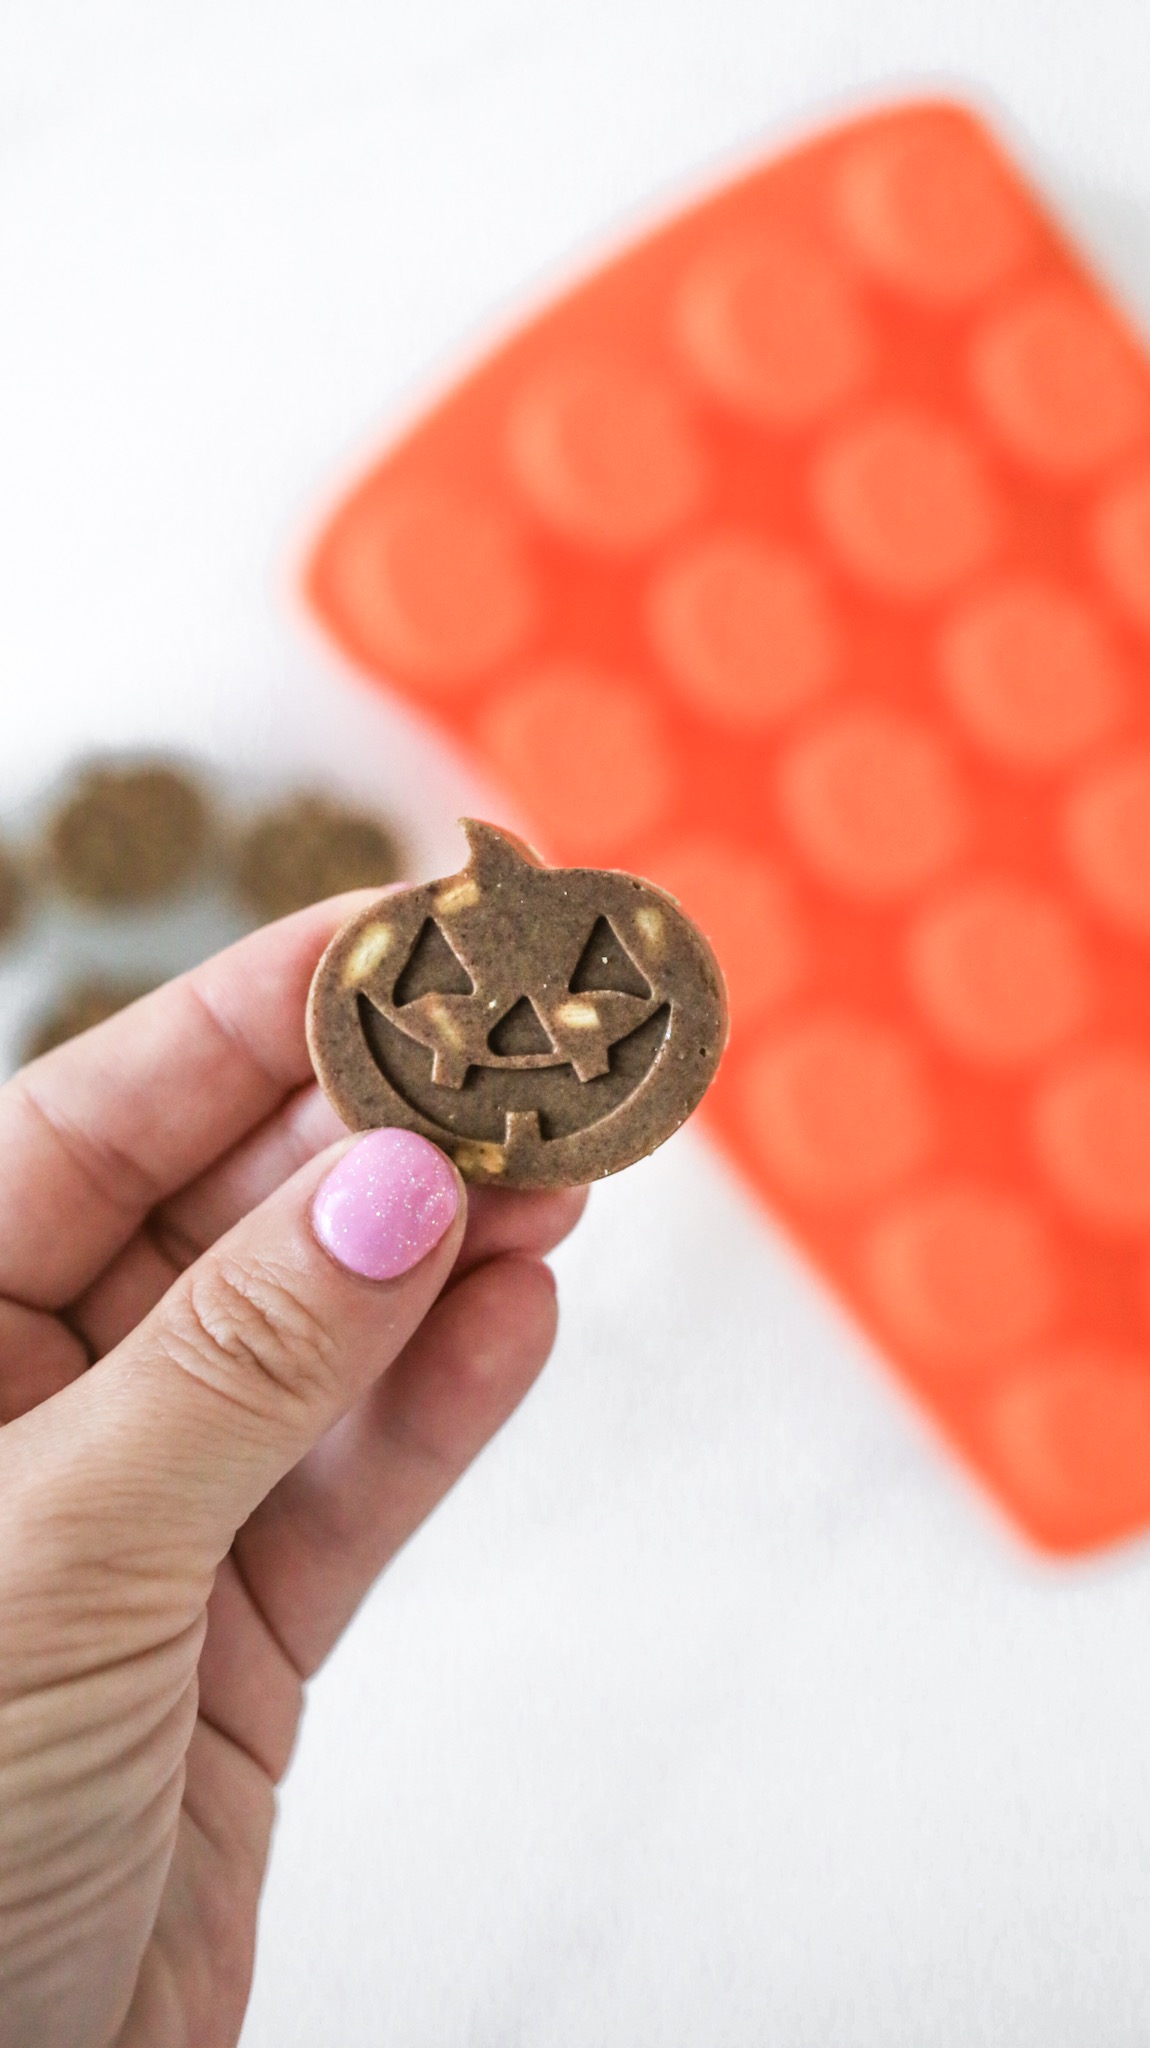 Keto Sunflower Seed Butter Cups